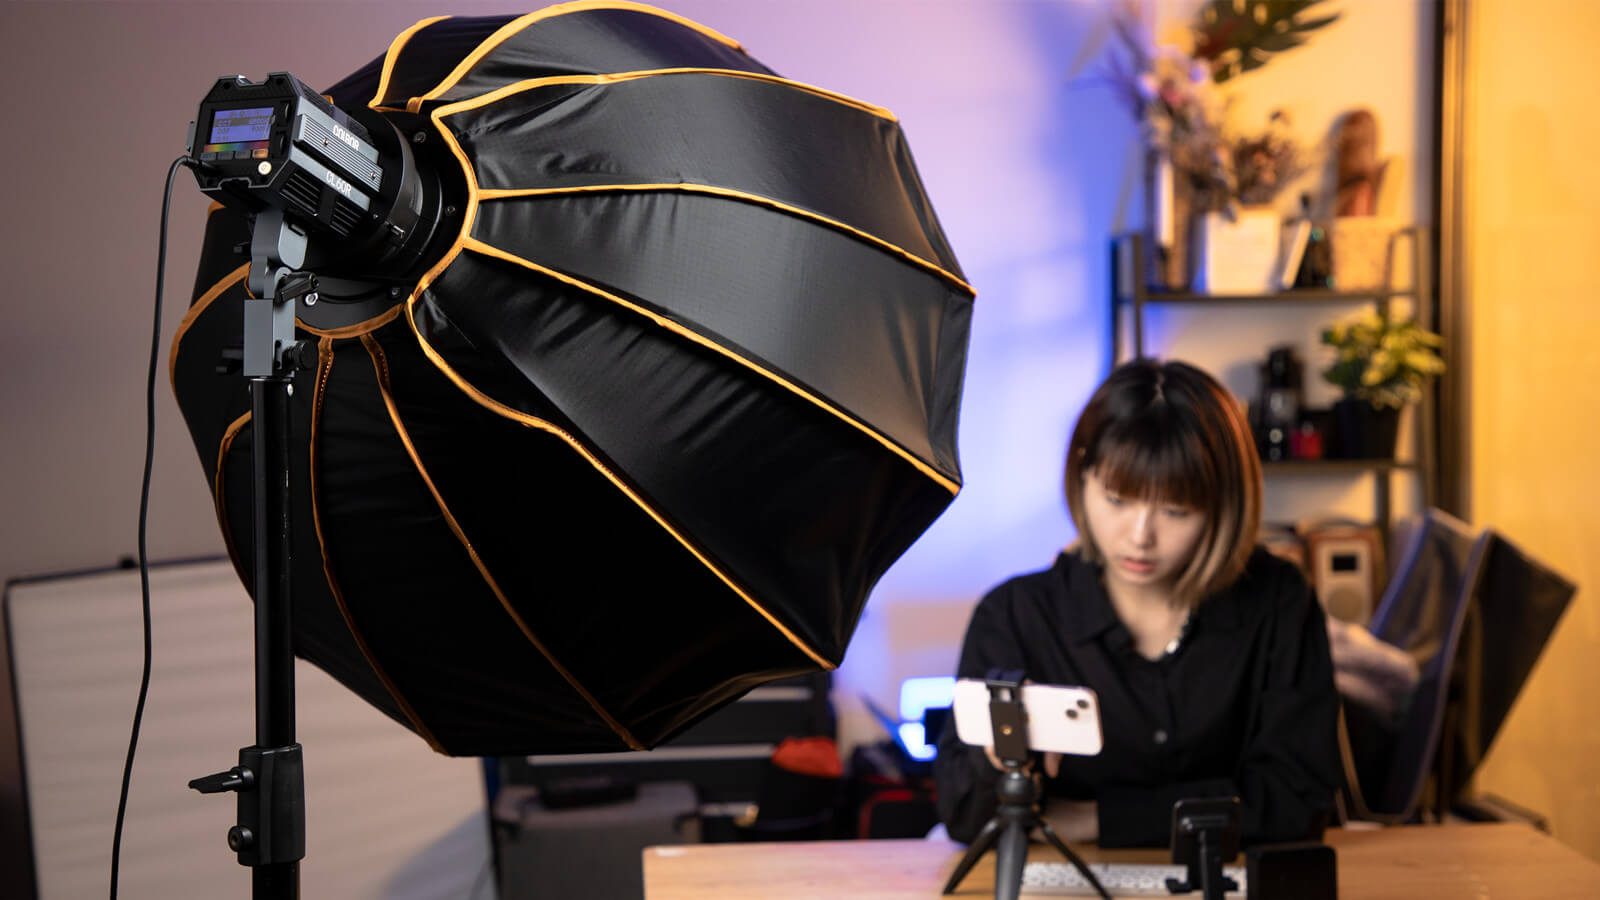 COLBOR CL60R RGB LED light is used with a softbox to offer soft lighting for video recording.